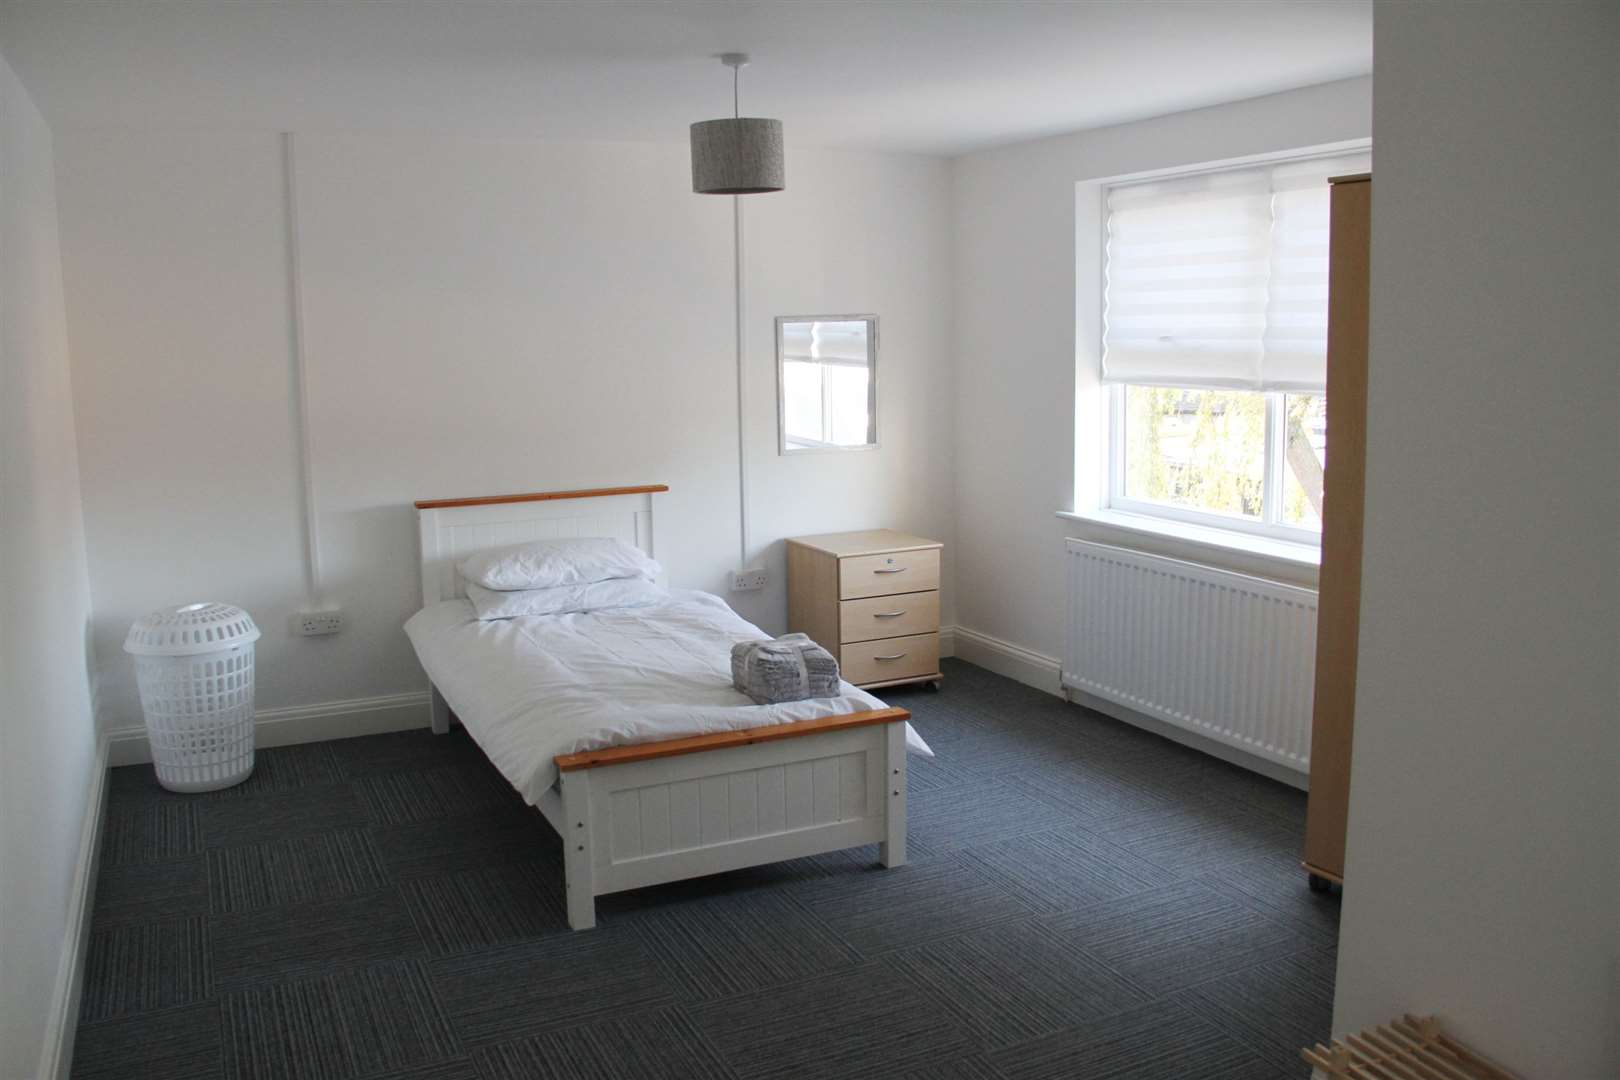 Inside one of the new bedrooms for rough sleepers in Wrotham Road. Photo: Gravesham council